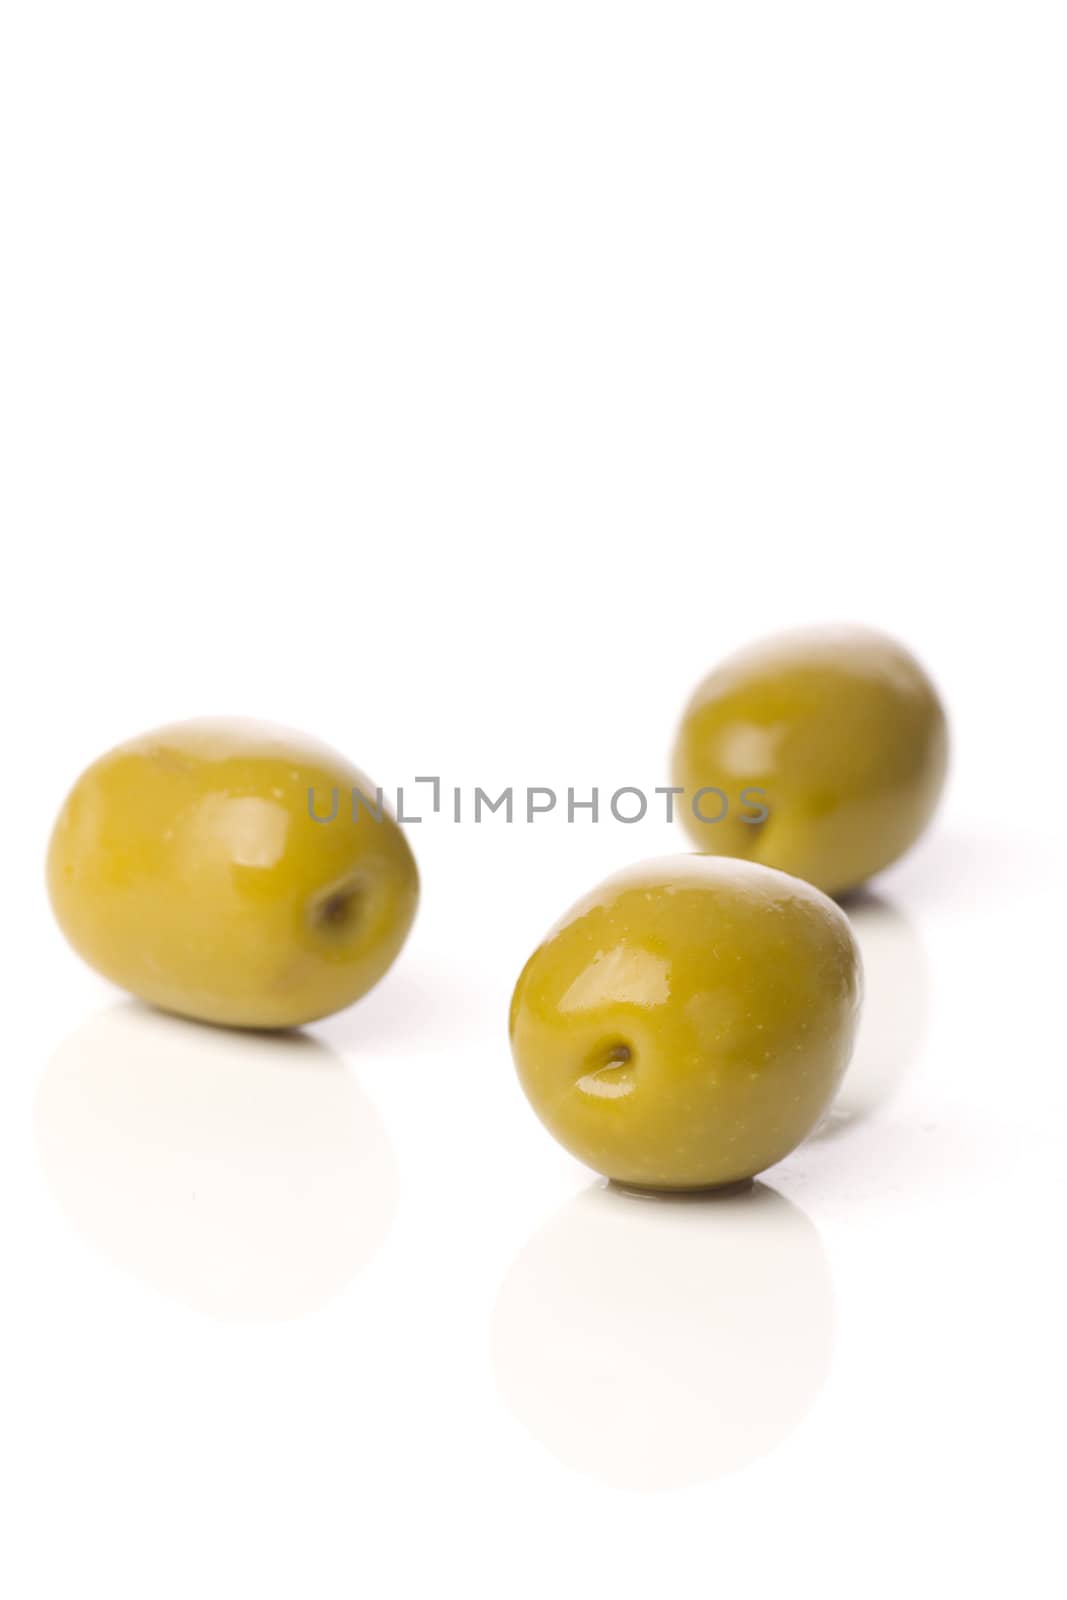 green greek olives on white background - healthy eating